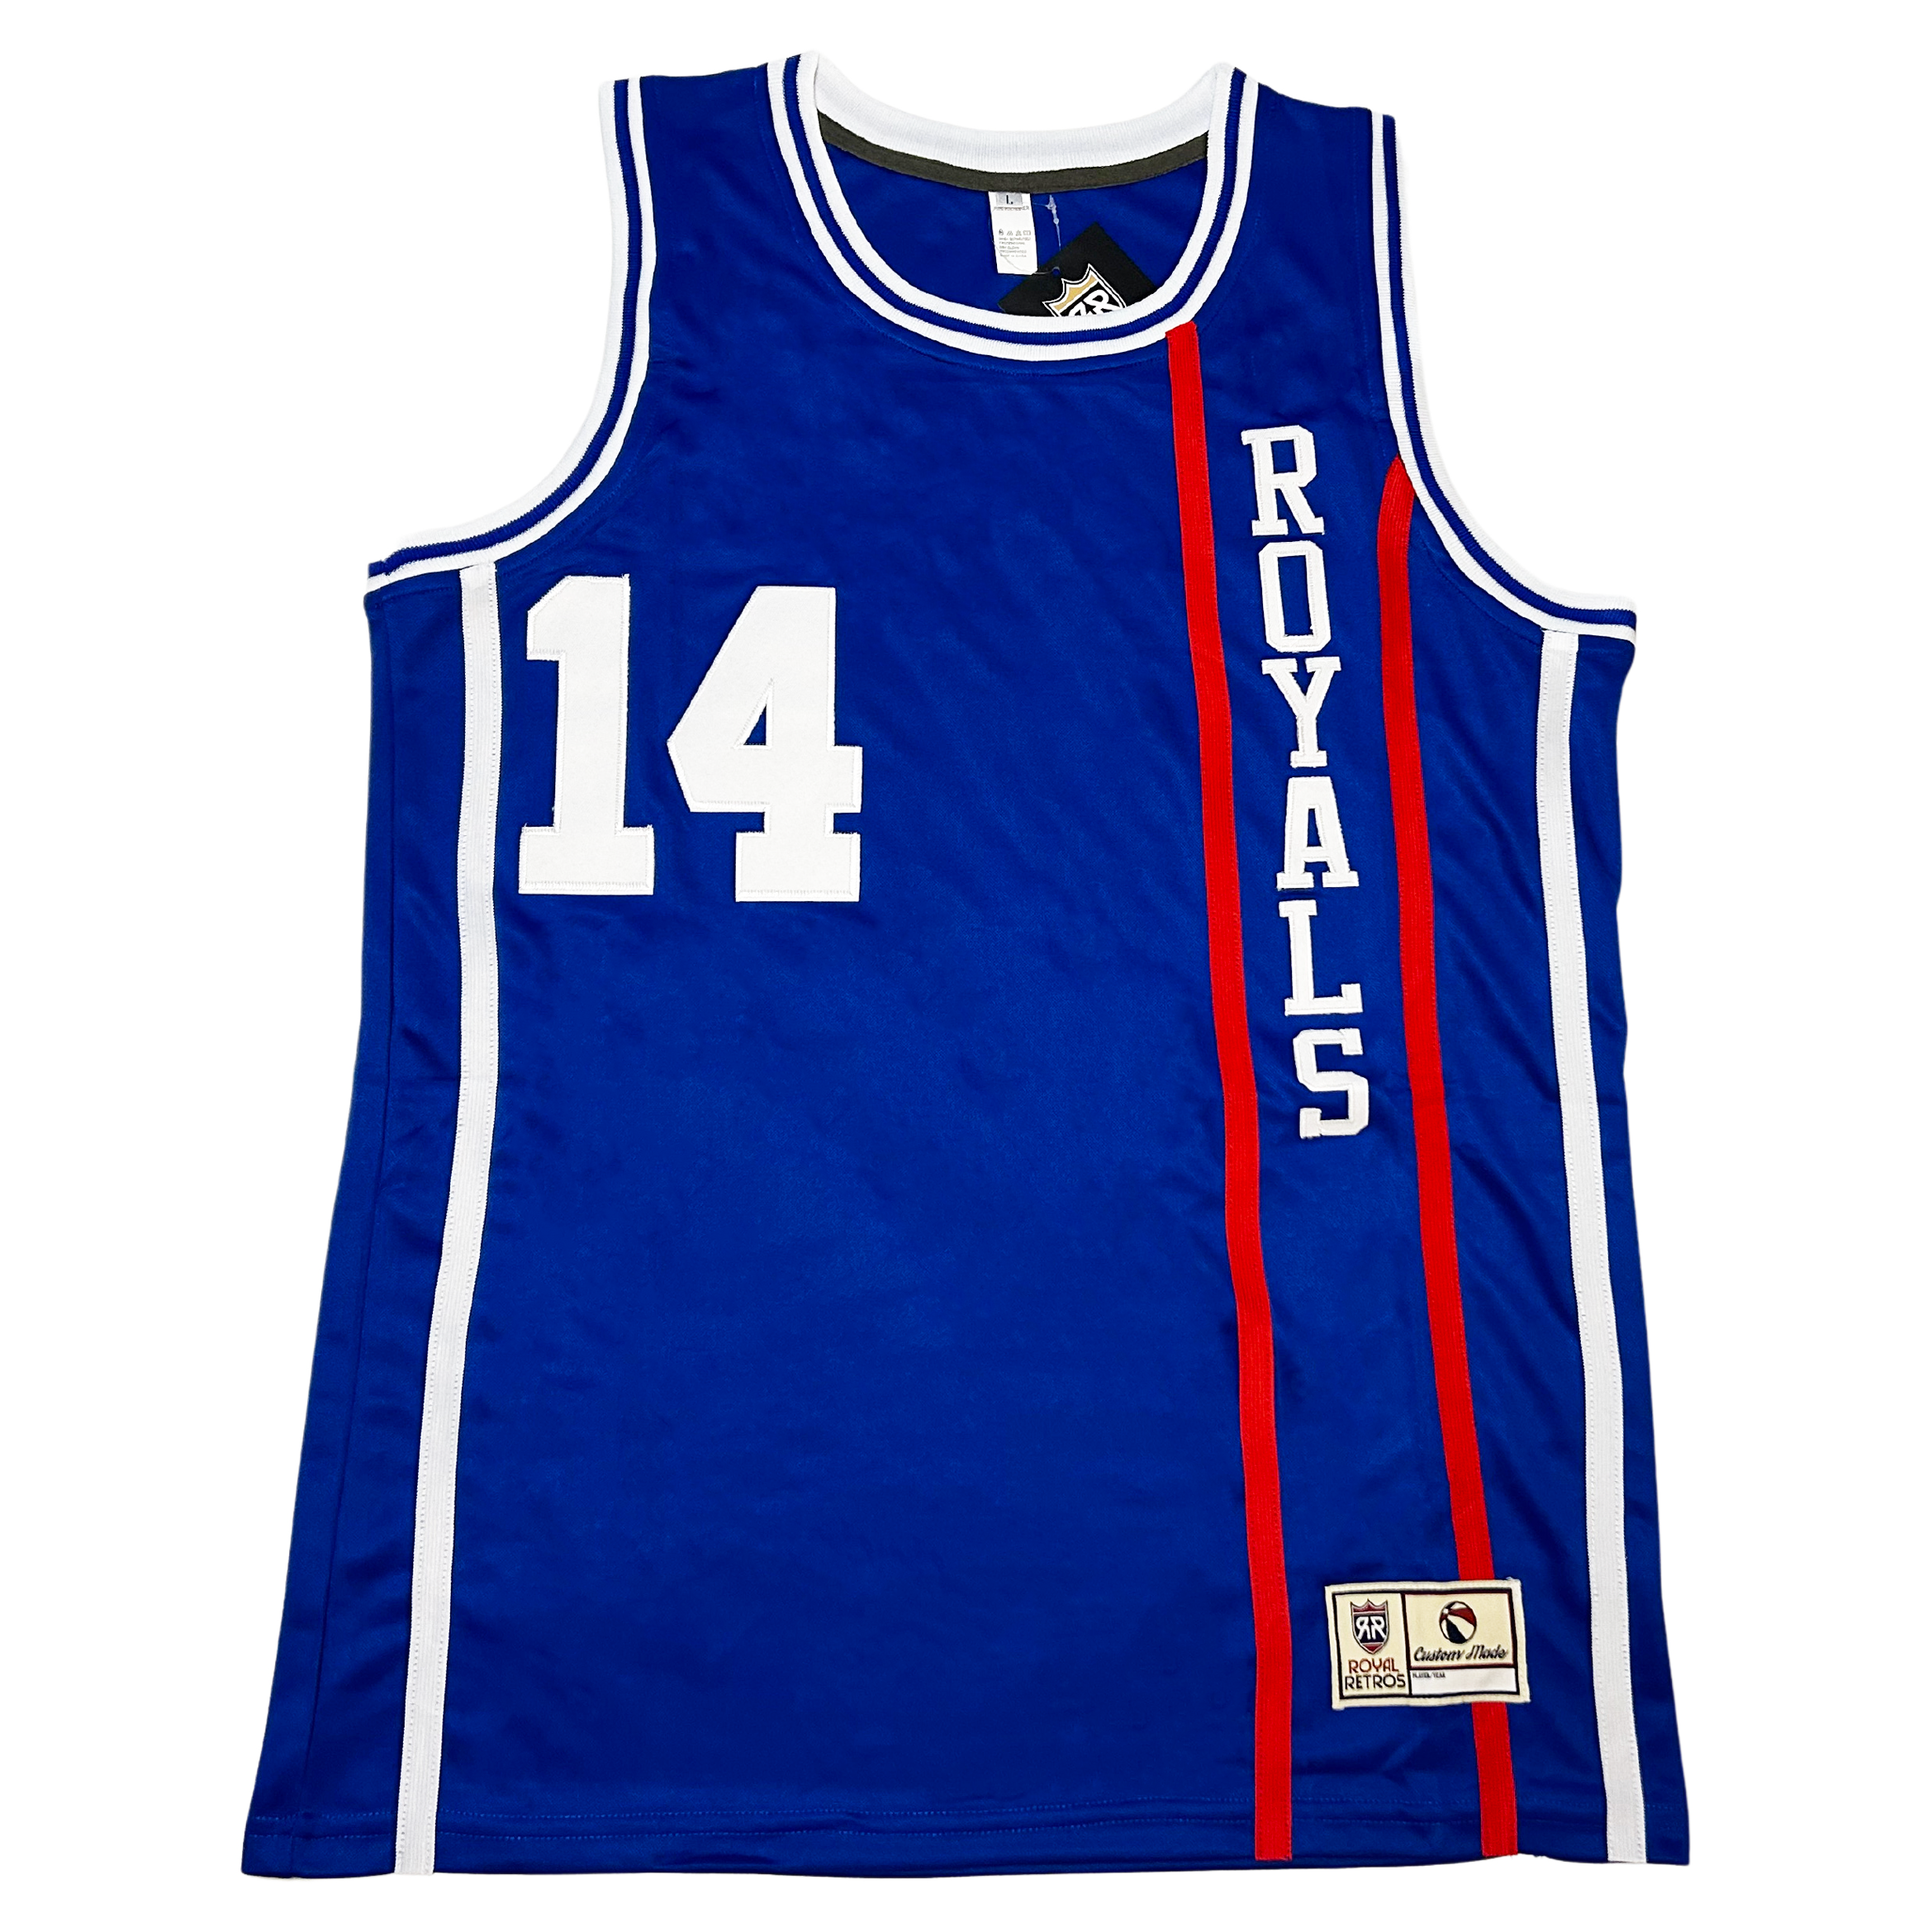 Oscar Robertson Signed Royals Jersey Tri Star Authentic